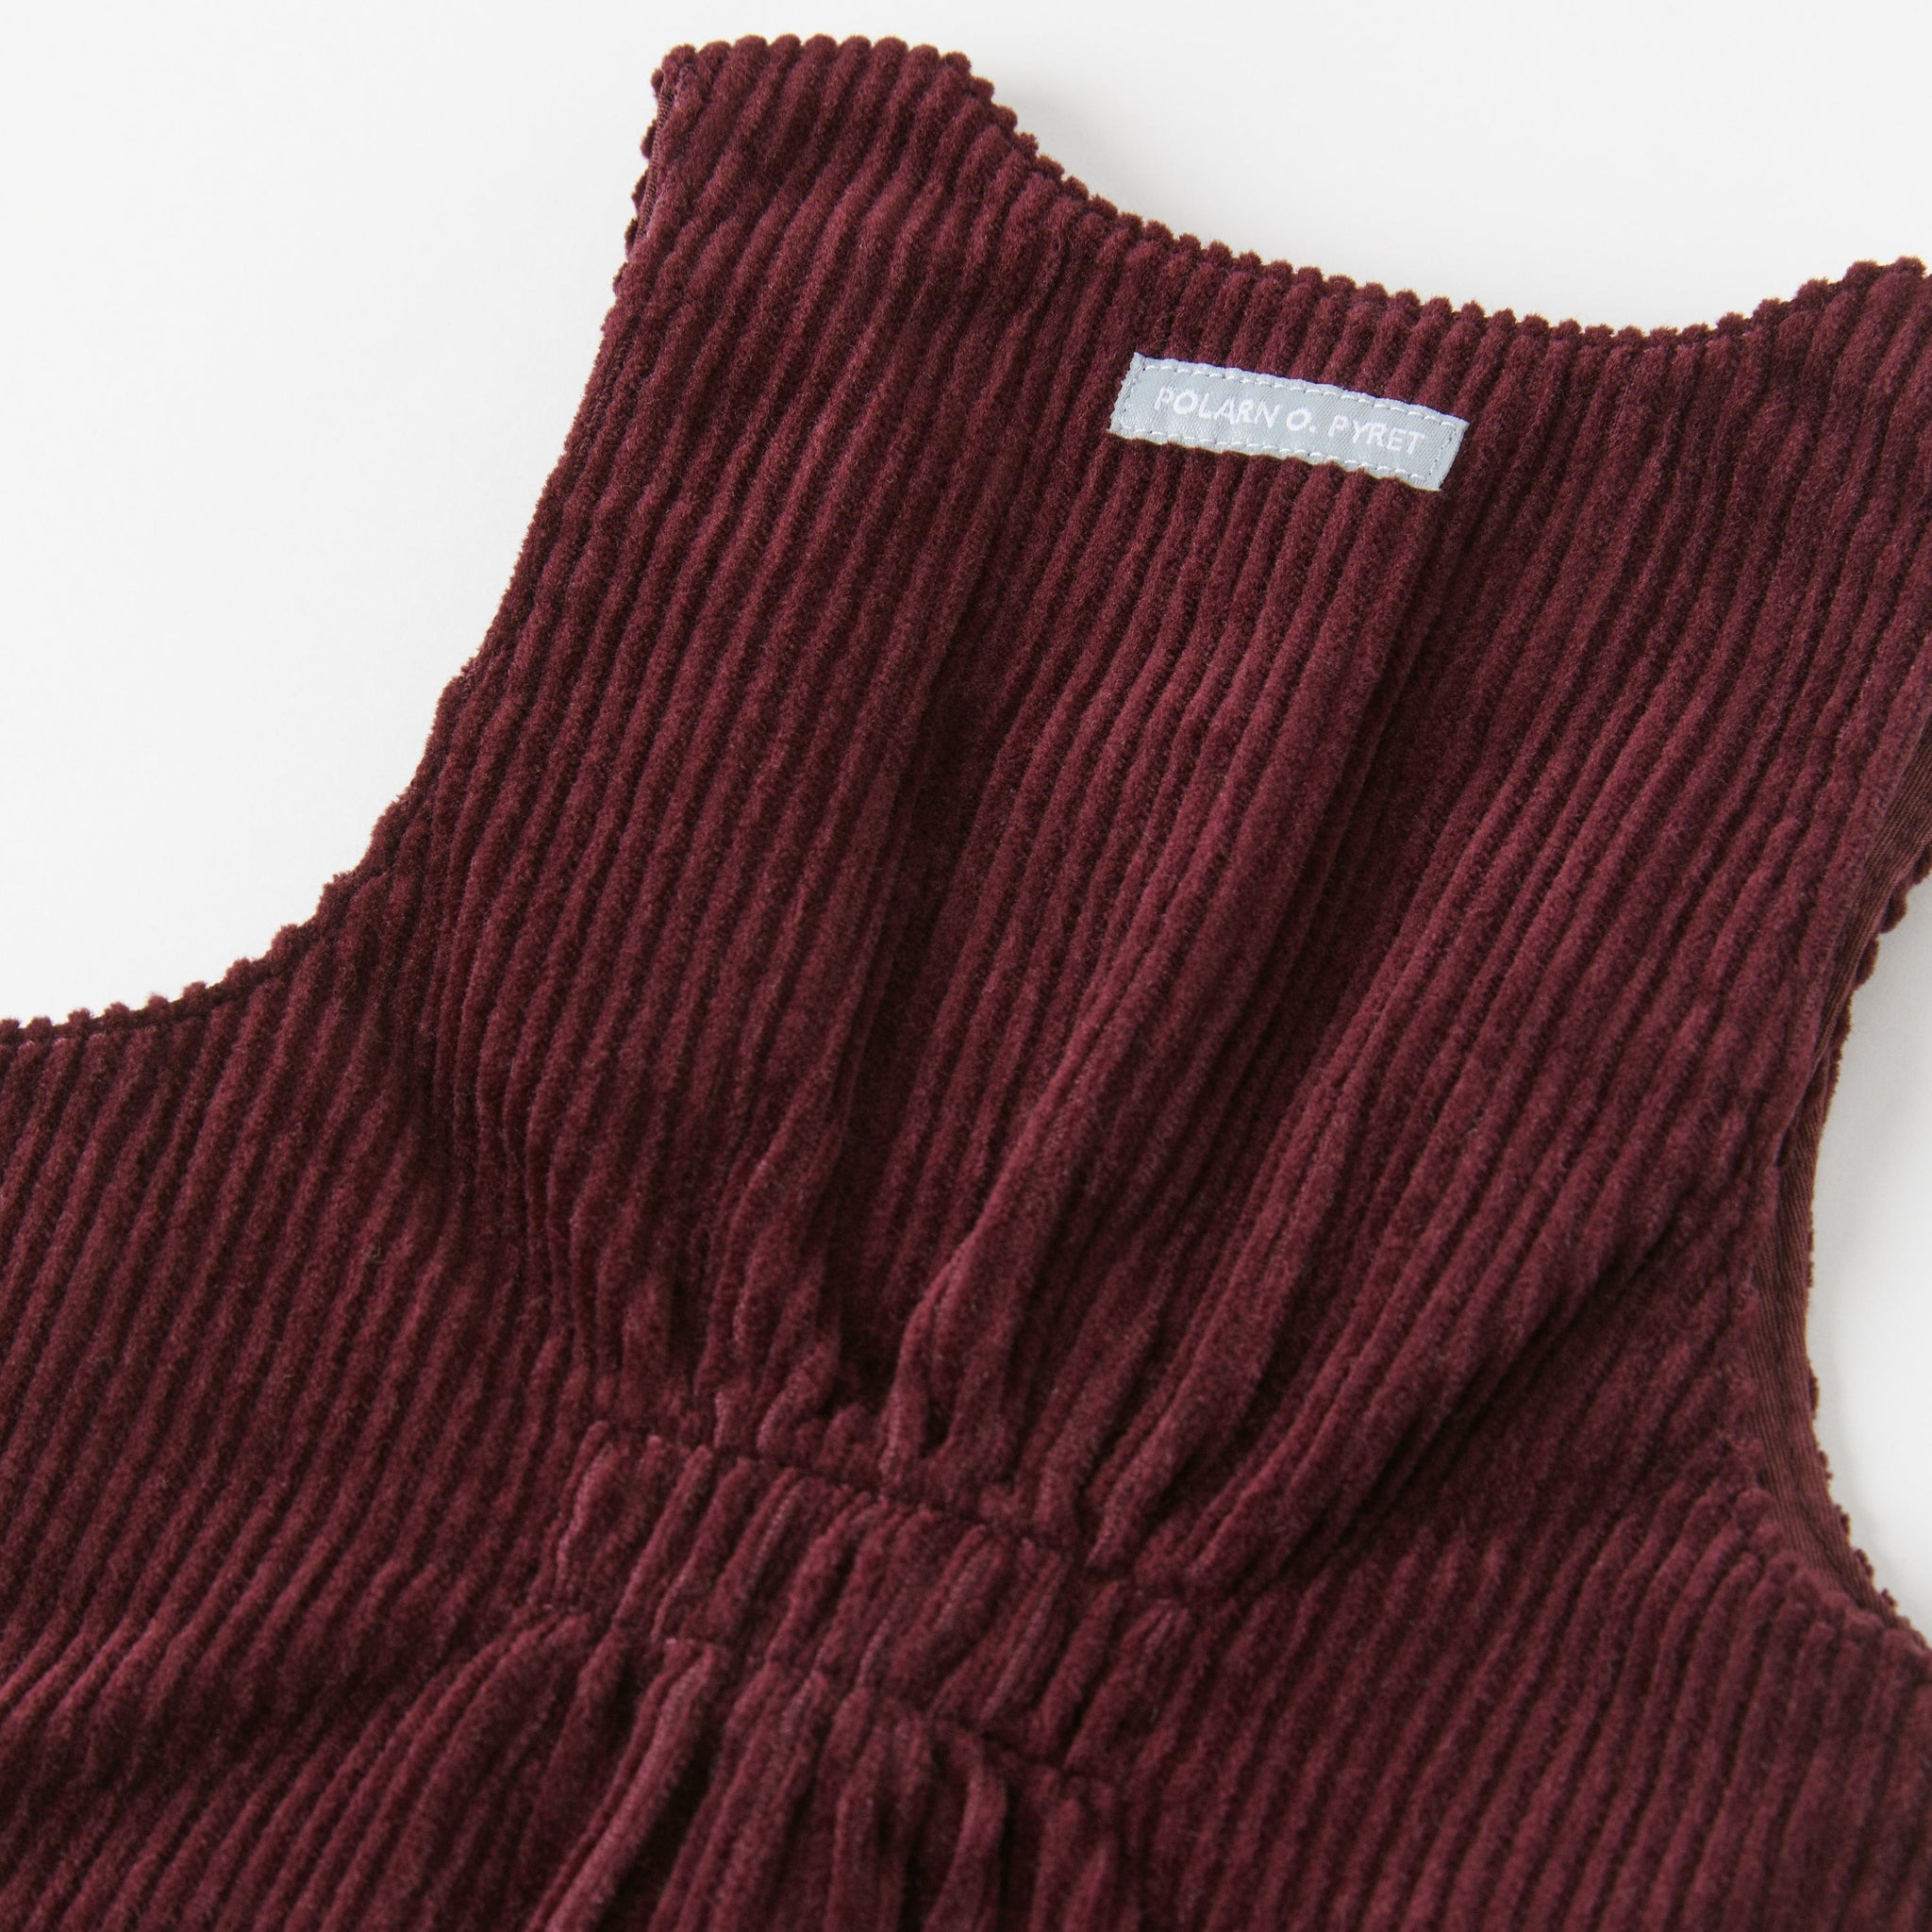 Corduroy Burgundy Baby Dress from the Polarn O. Pyret Kidswear collection. Ethically produced kids clothing.